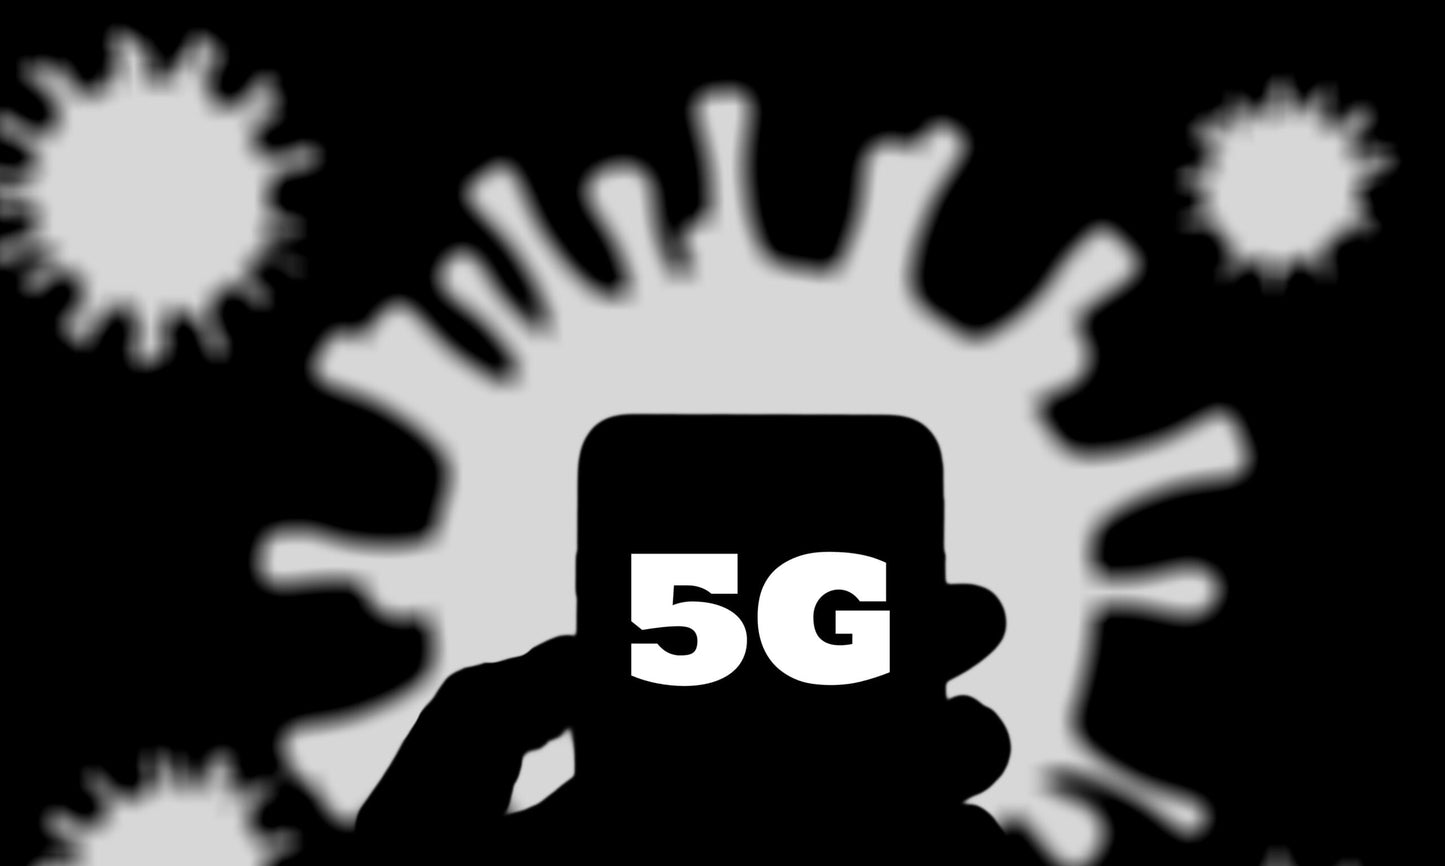 Graphic in black and white of a hand holding a phone that says 5G, with strange blob shapes in the background